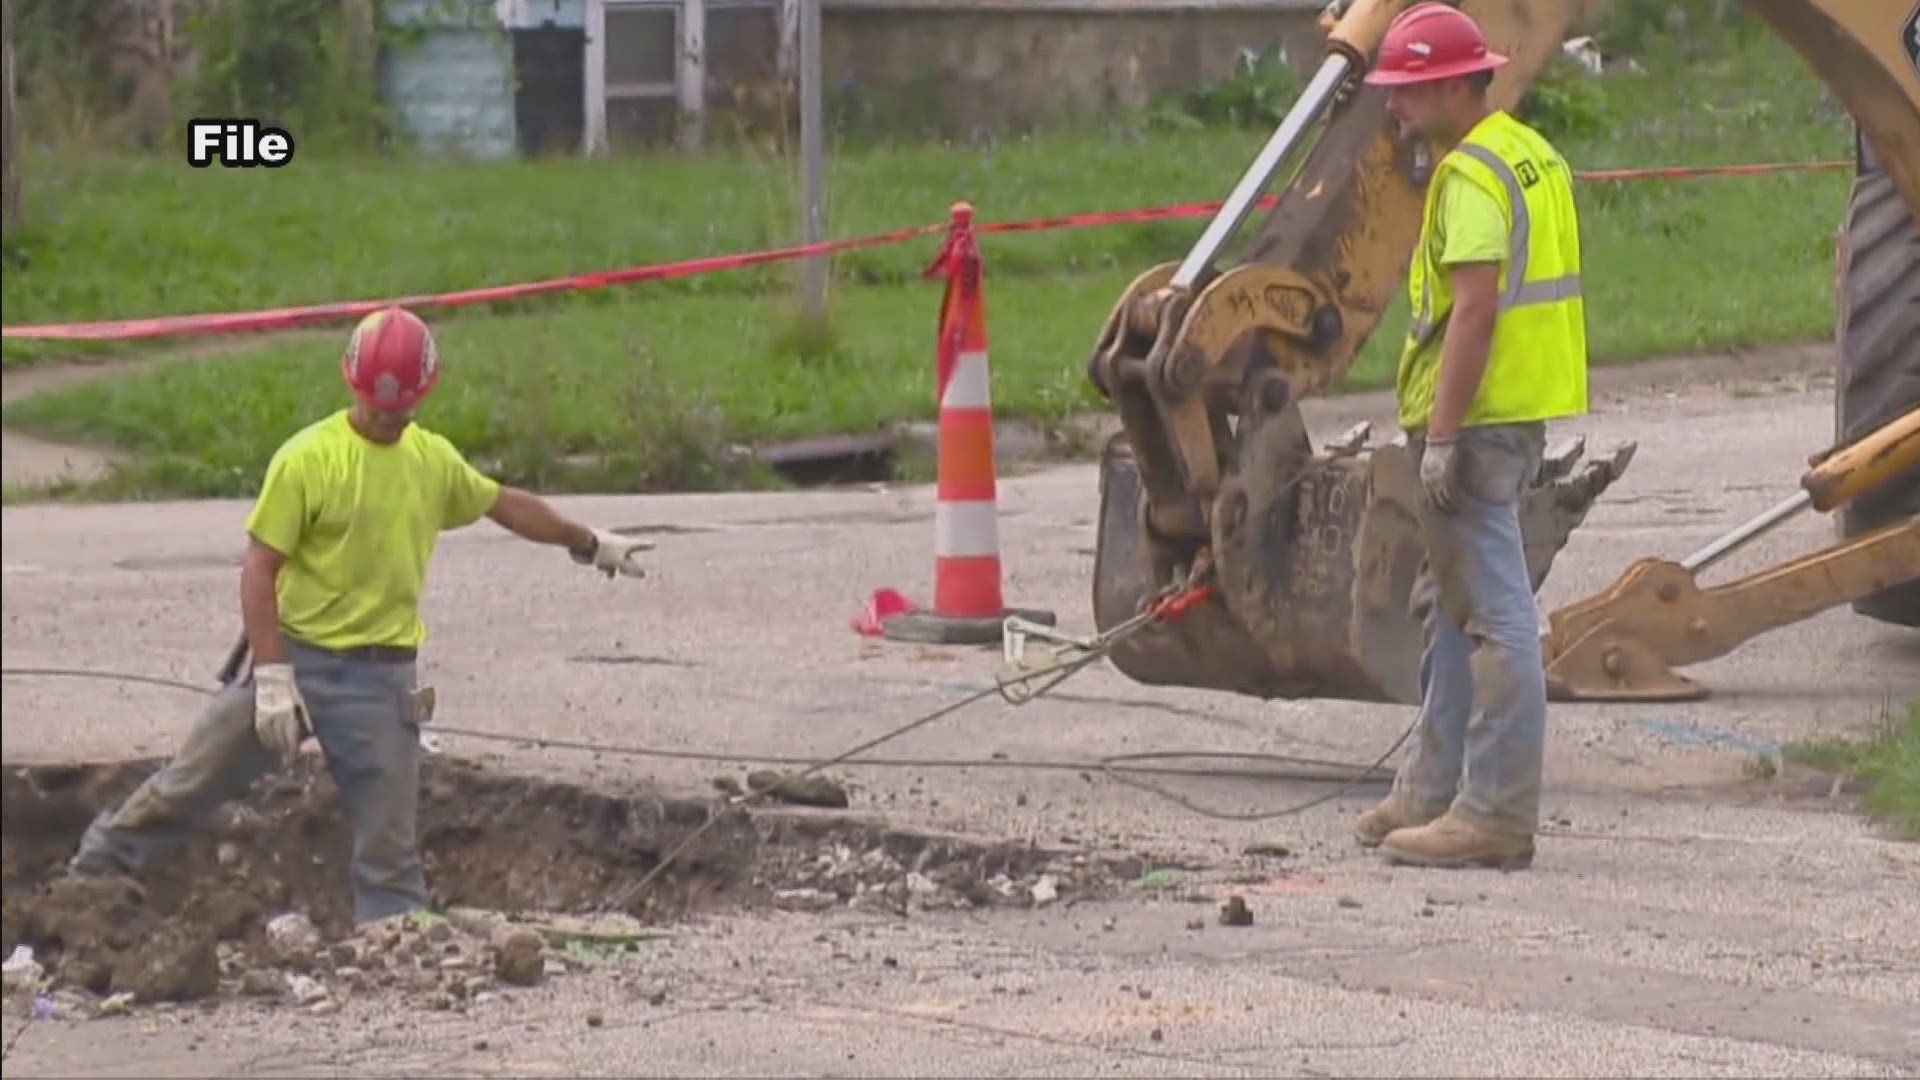 Grand Rapids has been selected to receive a $5.1 million federal water infrastructure improvement grant to help pay for lead service line replacement.